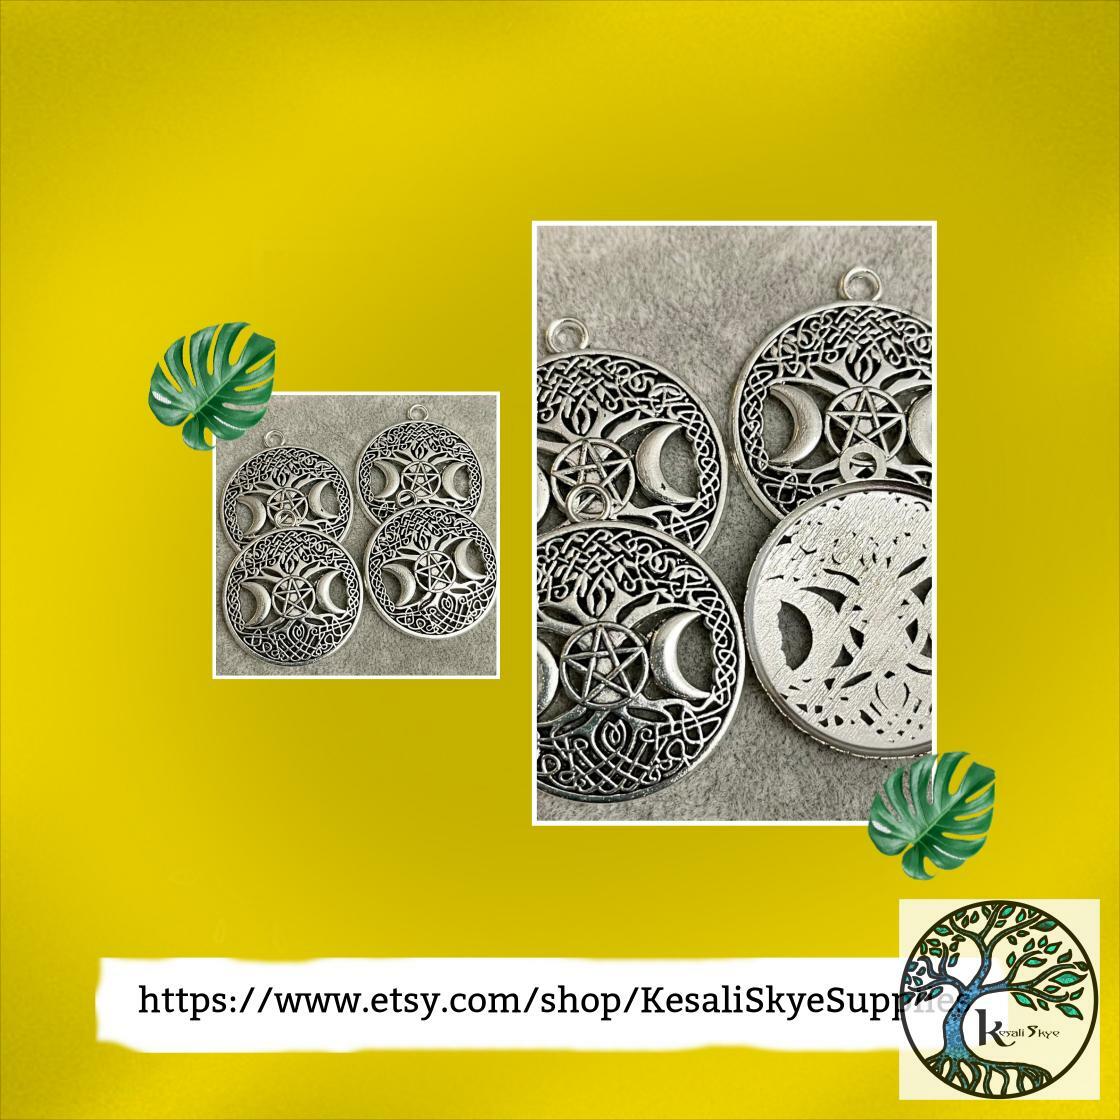 Wow picks! 4 pcs, 35mm, Round, Antiqued Silver Charms, Silver Charms, Silver Pendant, Goddess Pendant, Triple Moon, Goddess Charms, Wiccan, Hekate at $3.50 at etsy.com/listing/136377… Choose your wows. 🐕 #SilverPendant #SilverCharms